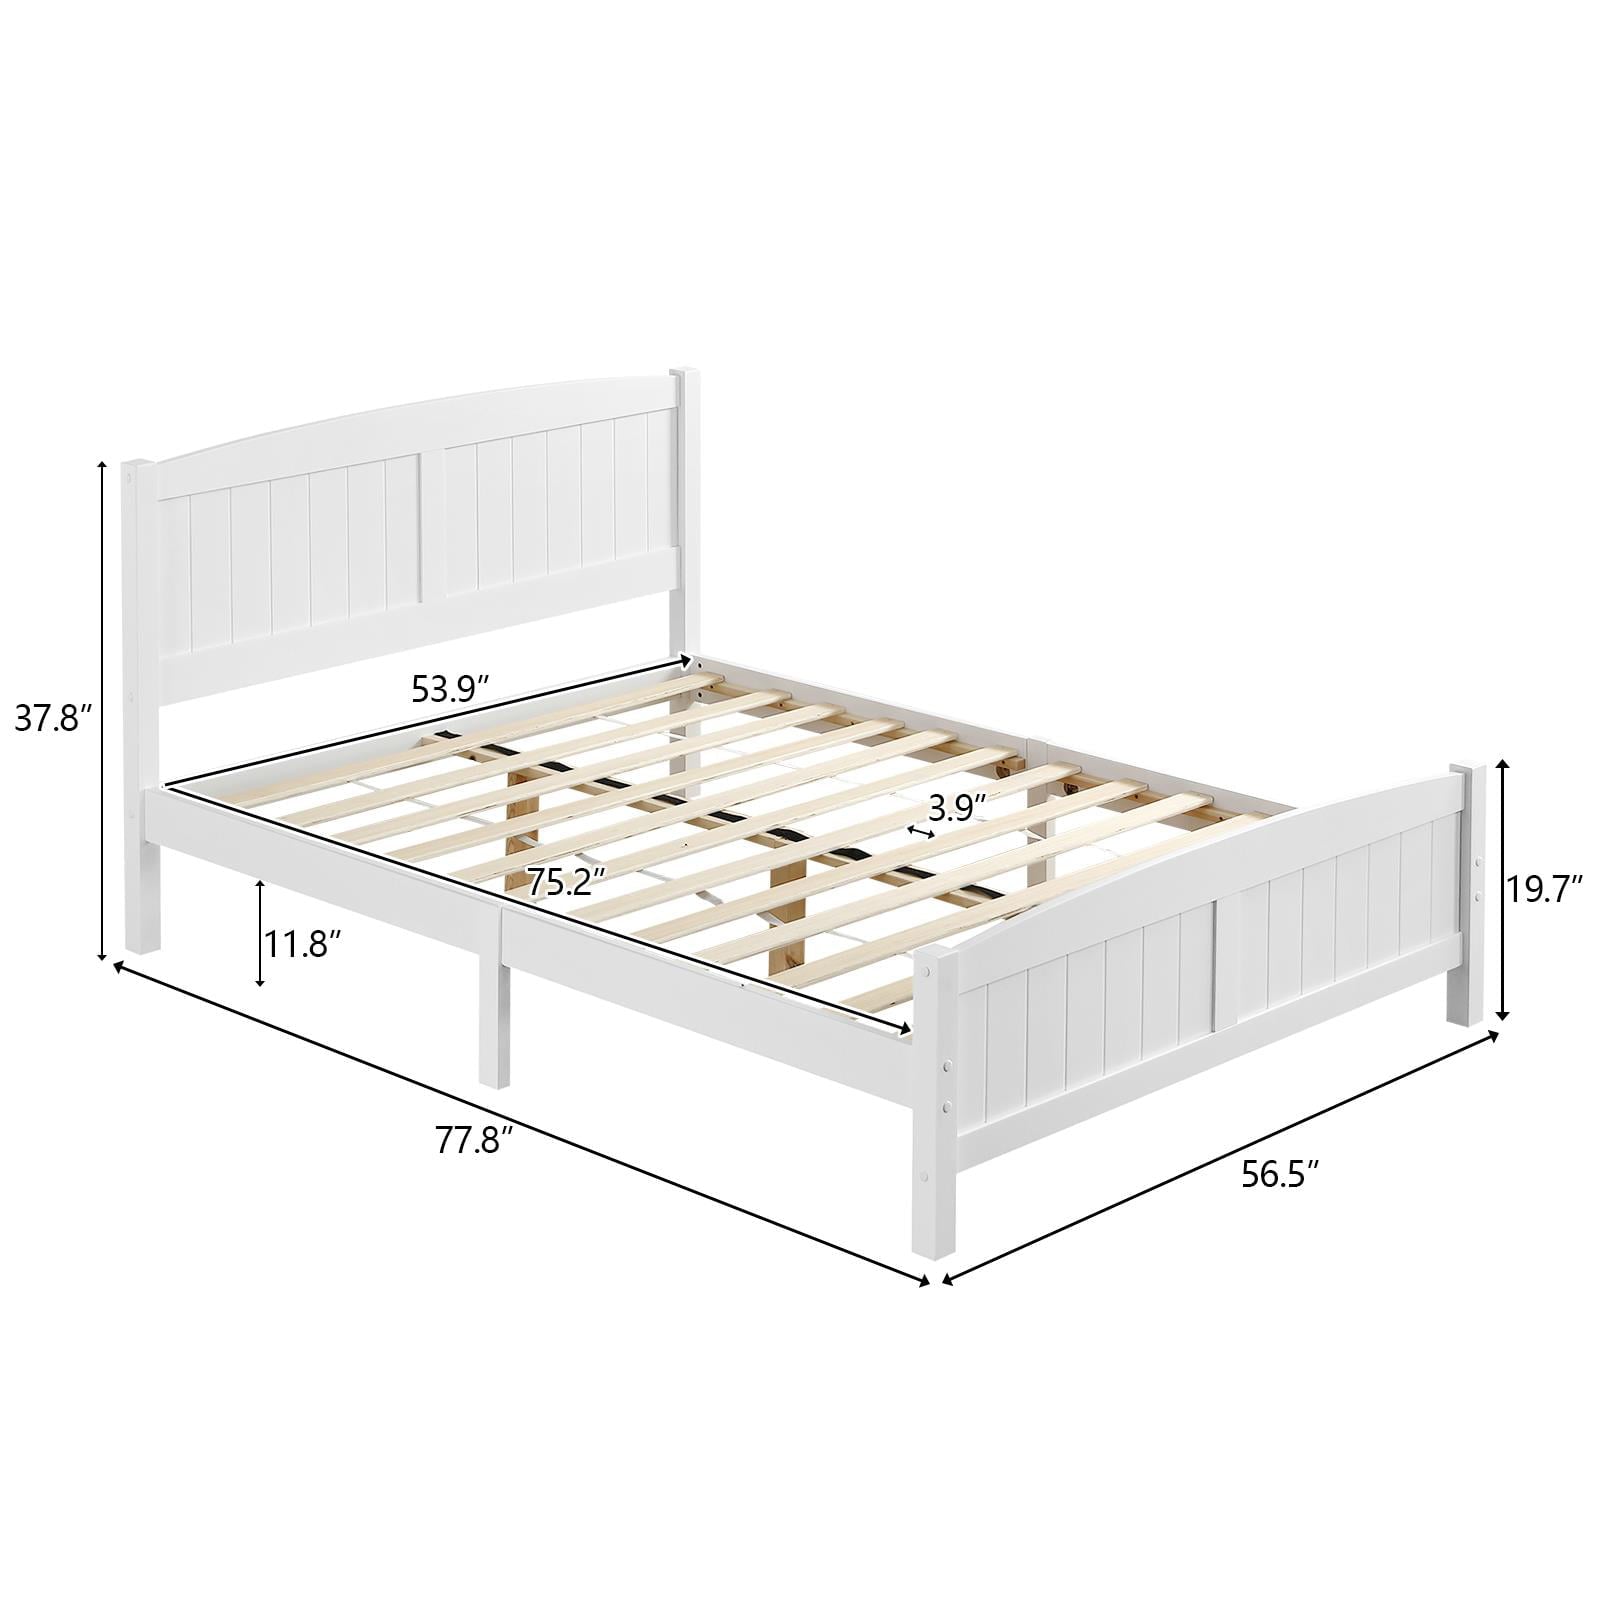 Zimtown Full Bed Frame,Solid Pine Wood Kids Twin Platform Bed Frame, Bedroom Full Bed with Headboard for Adults, White